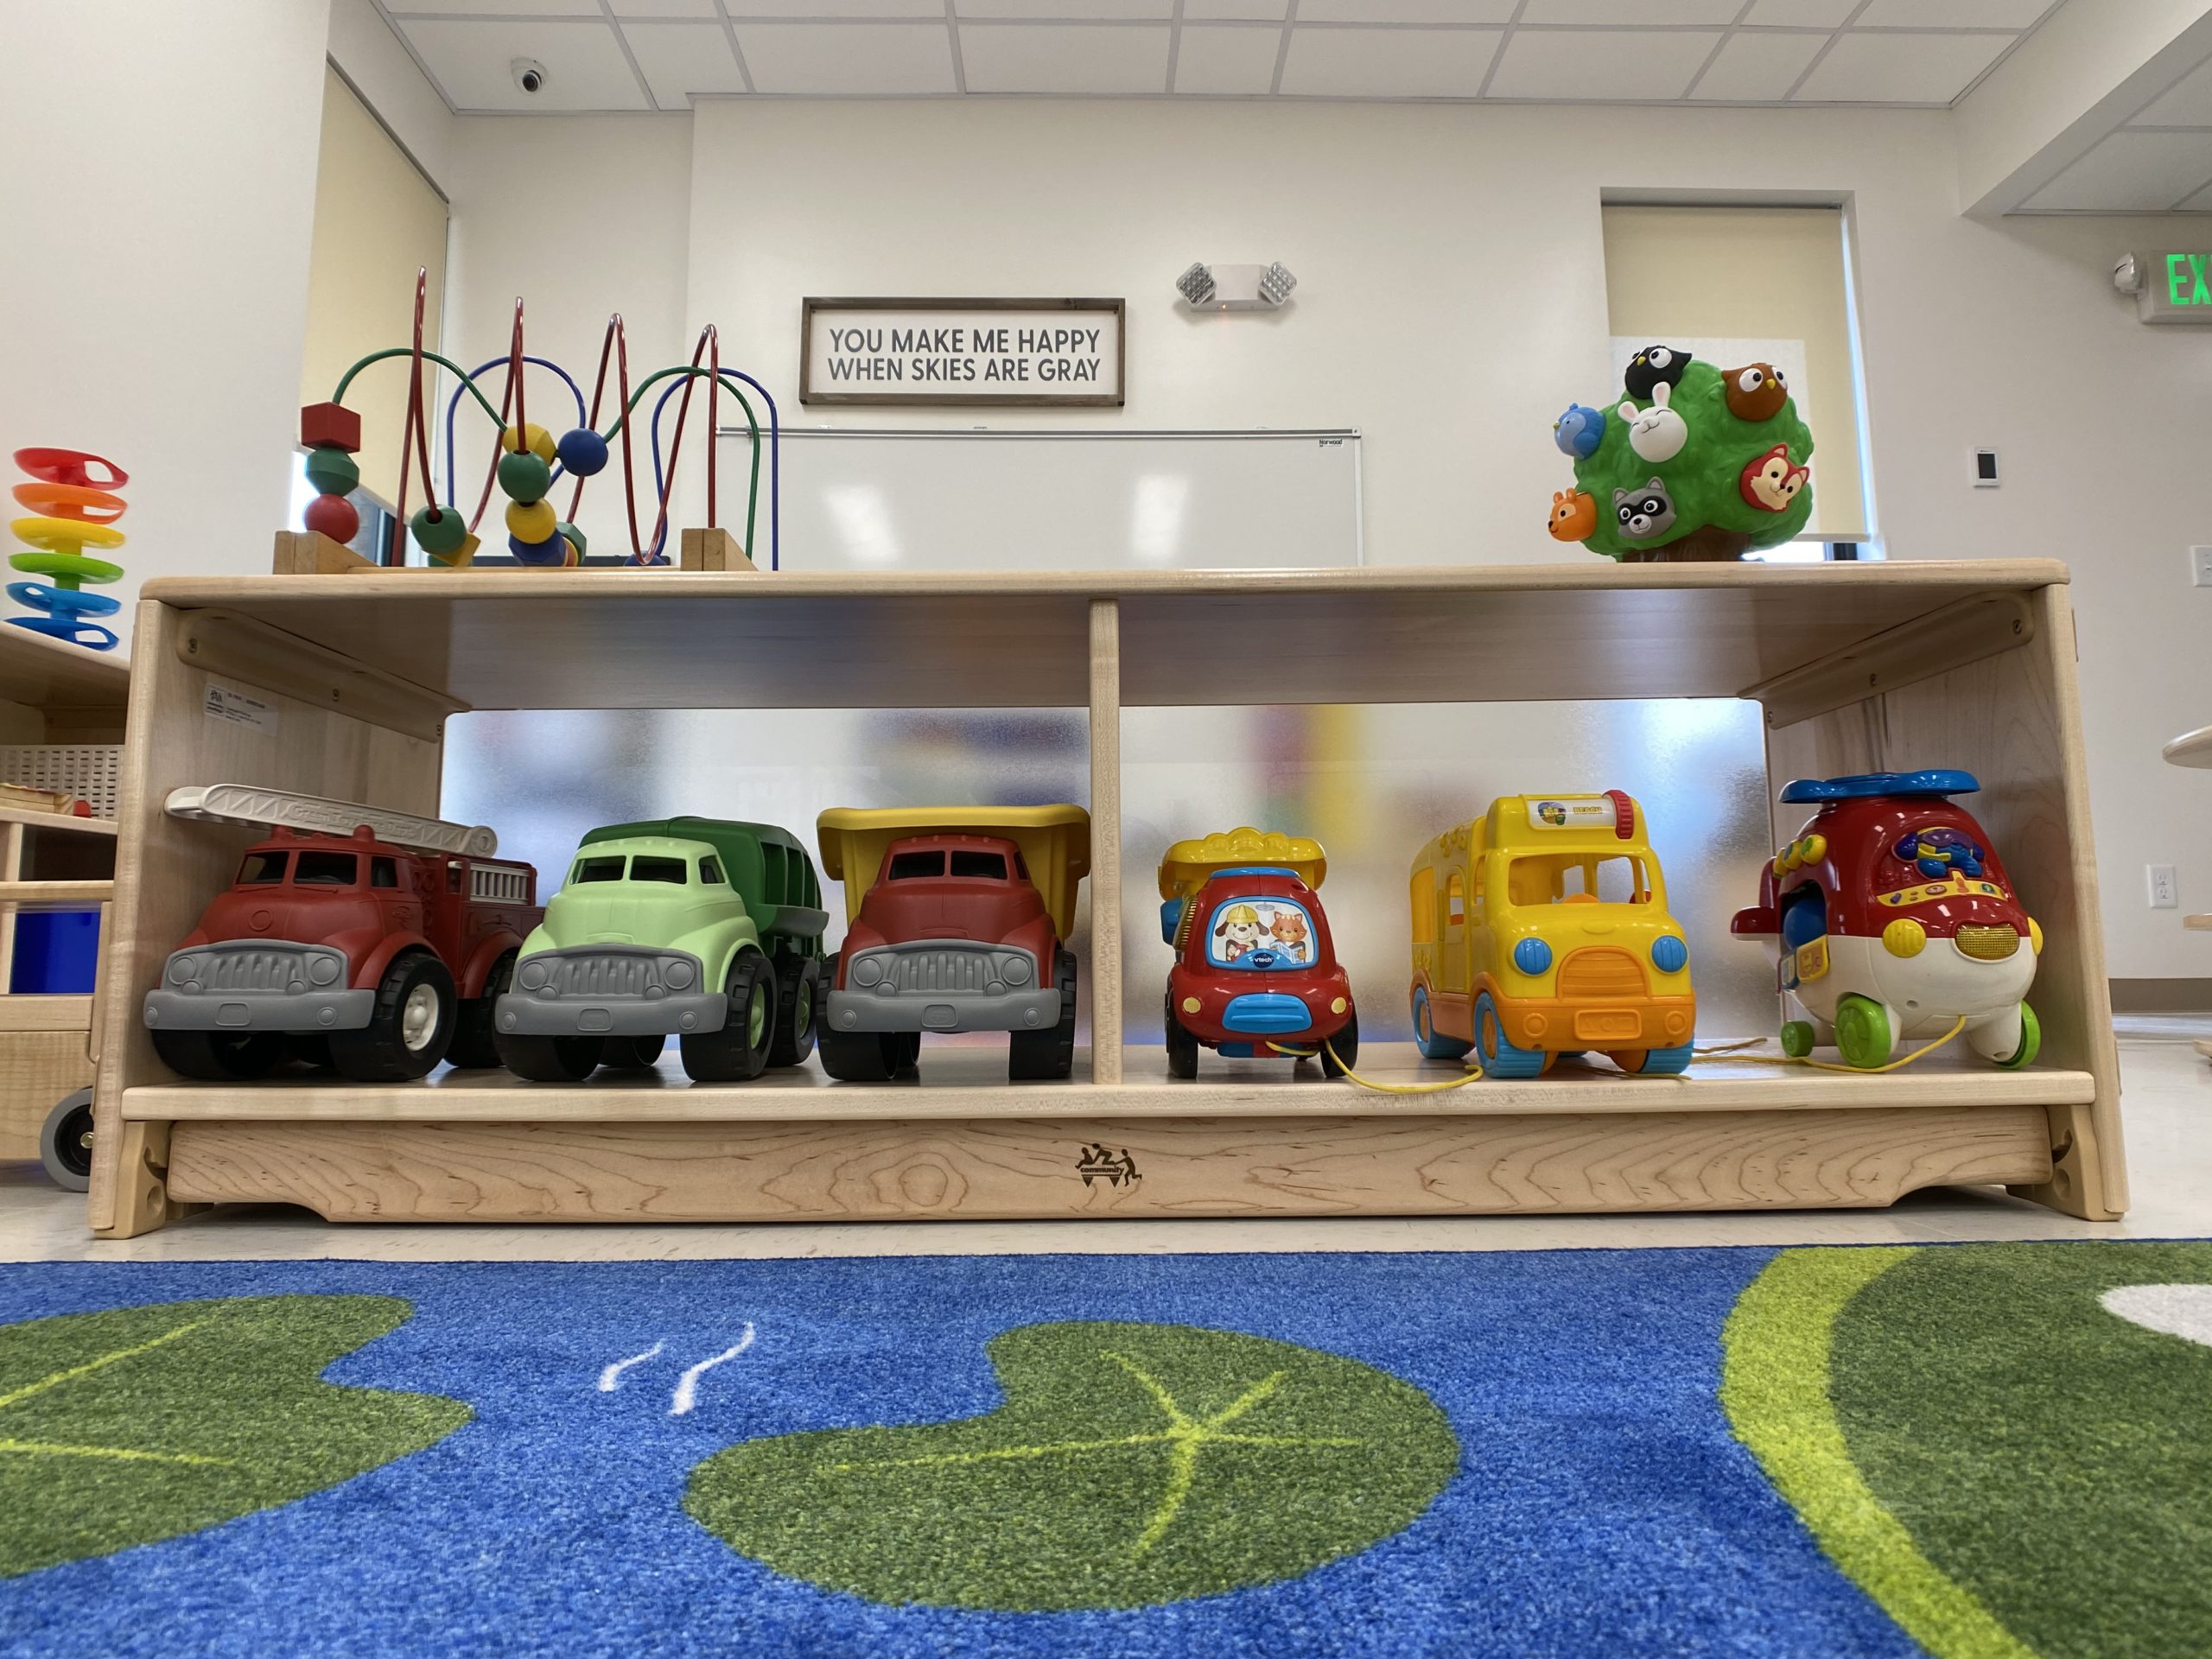 children's learning area - toys